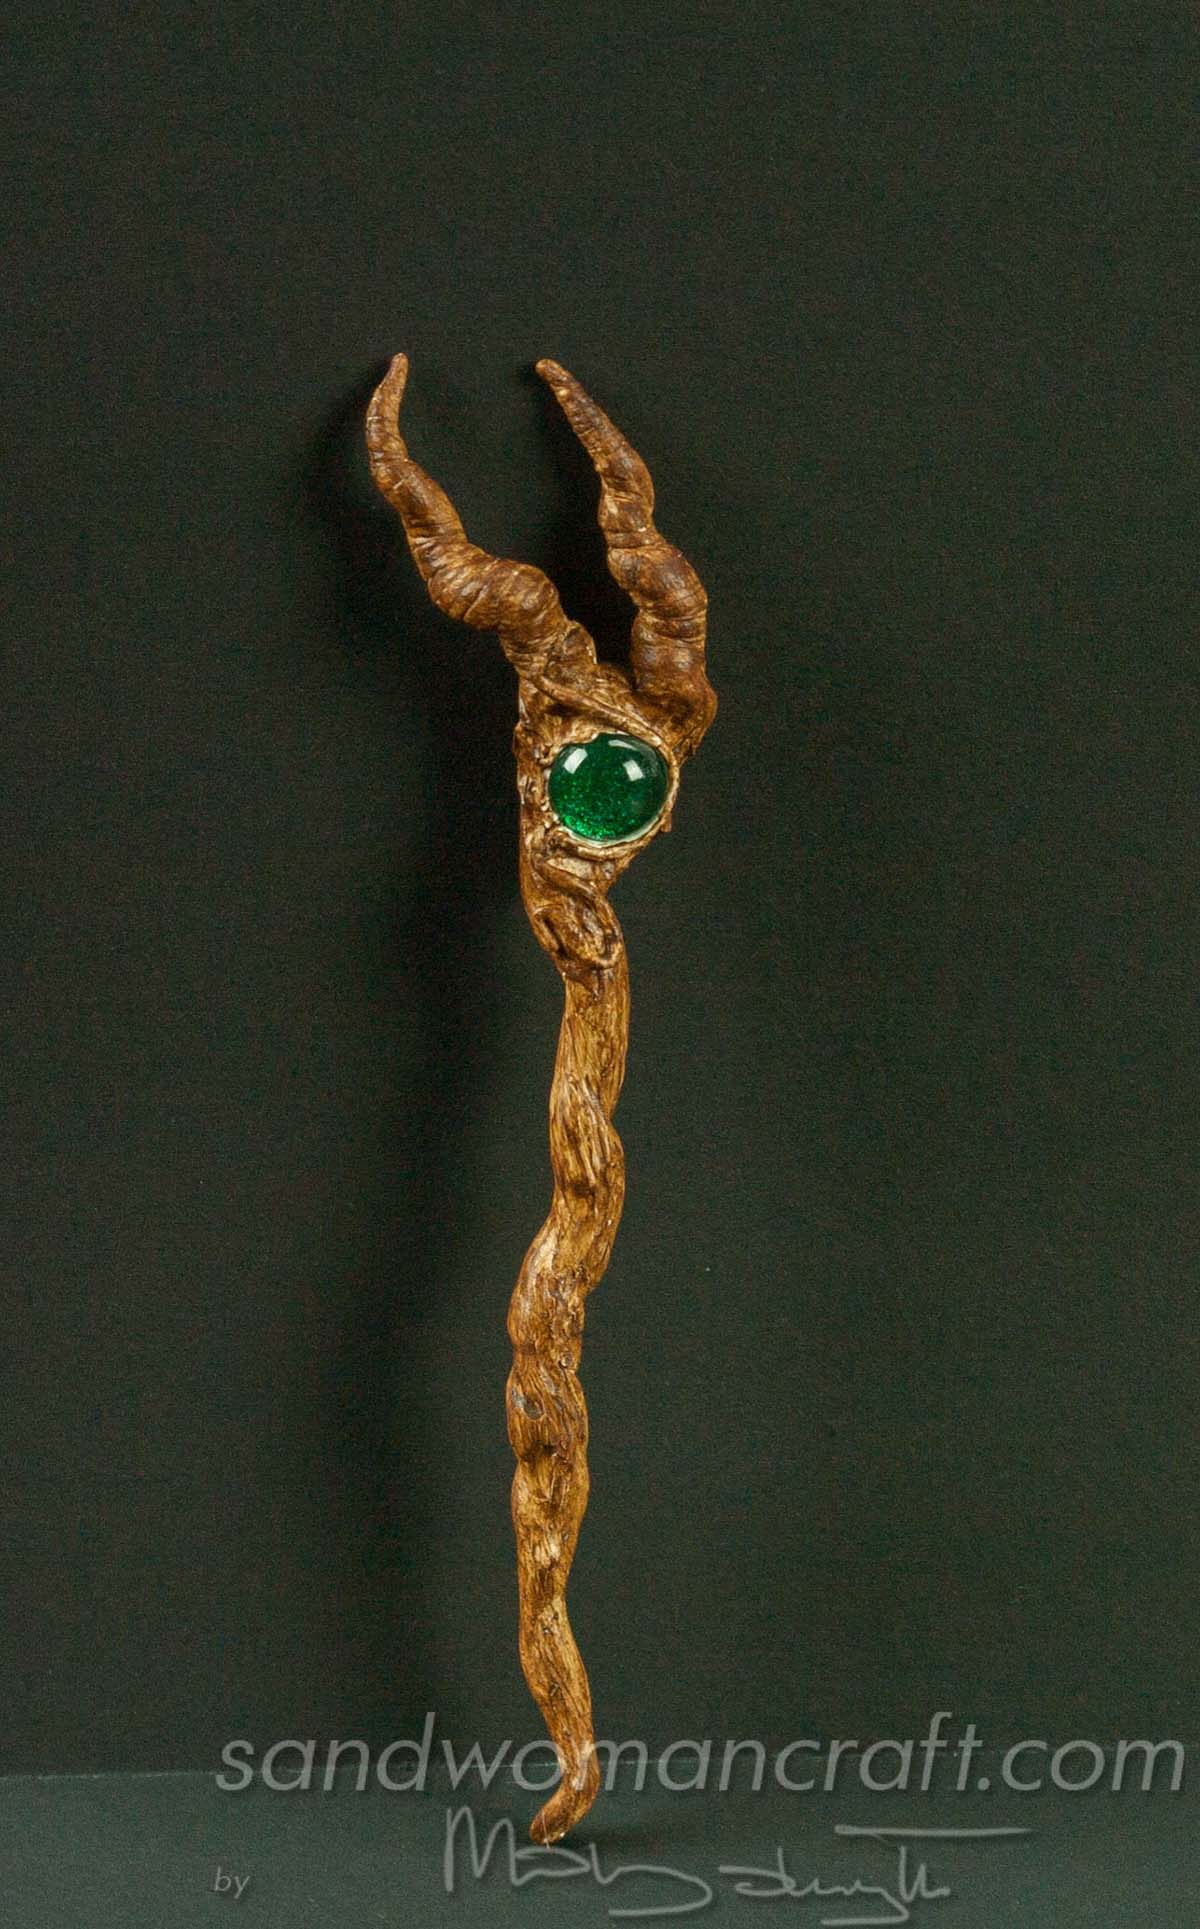 Miniature magic walking stick with horns and green glass stone